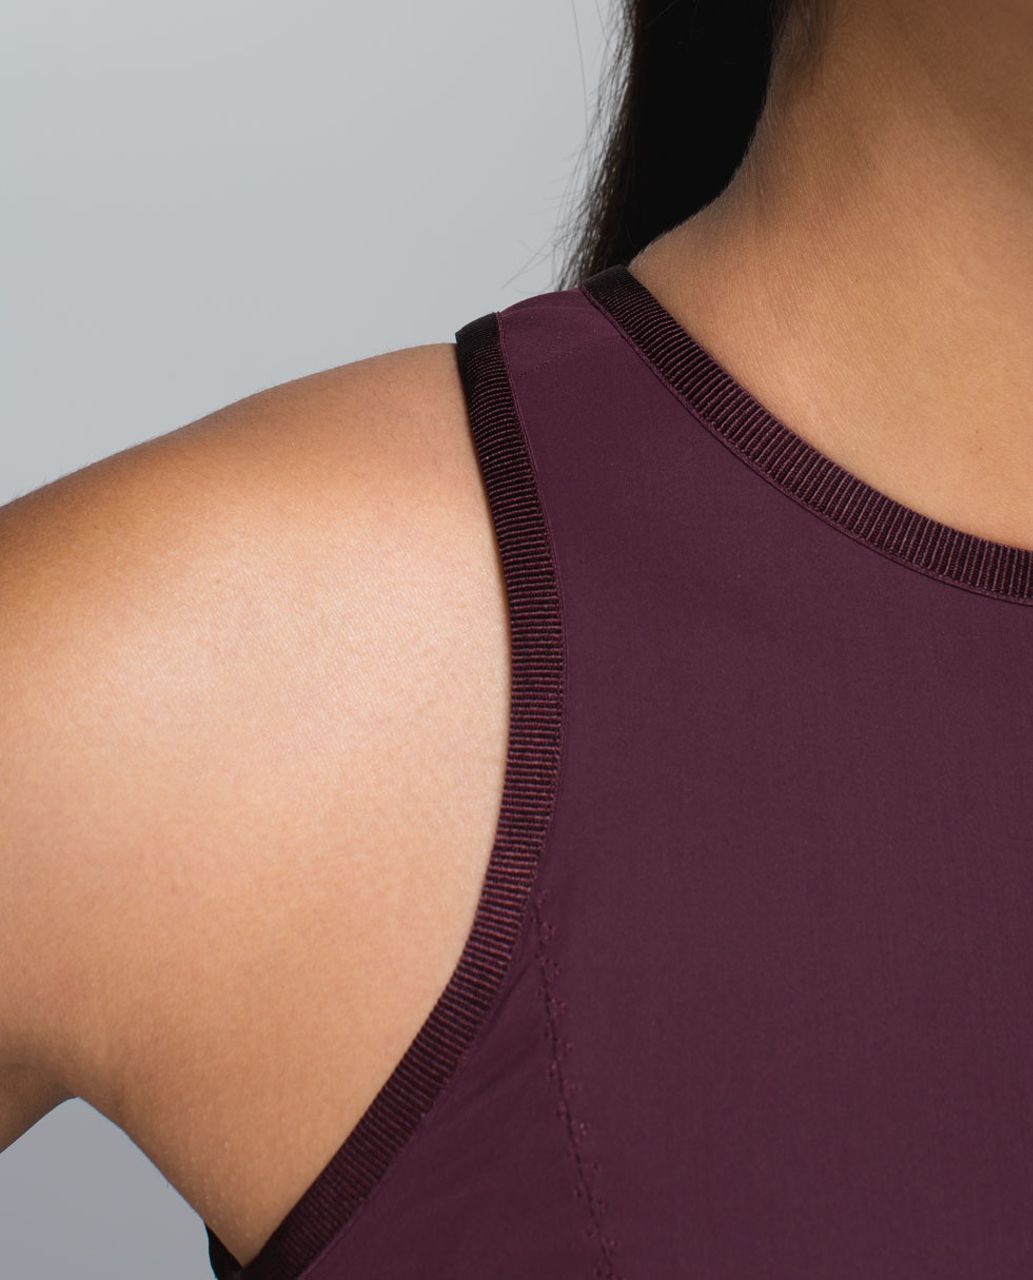 Lululemon Here To There Dress - Bordeaux Drama